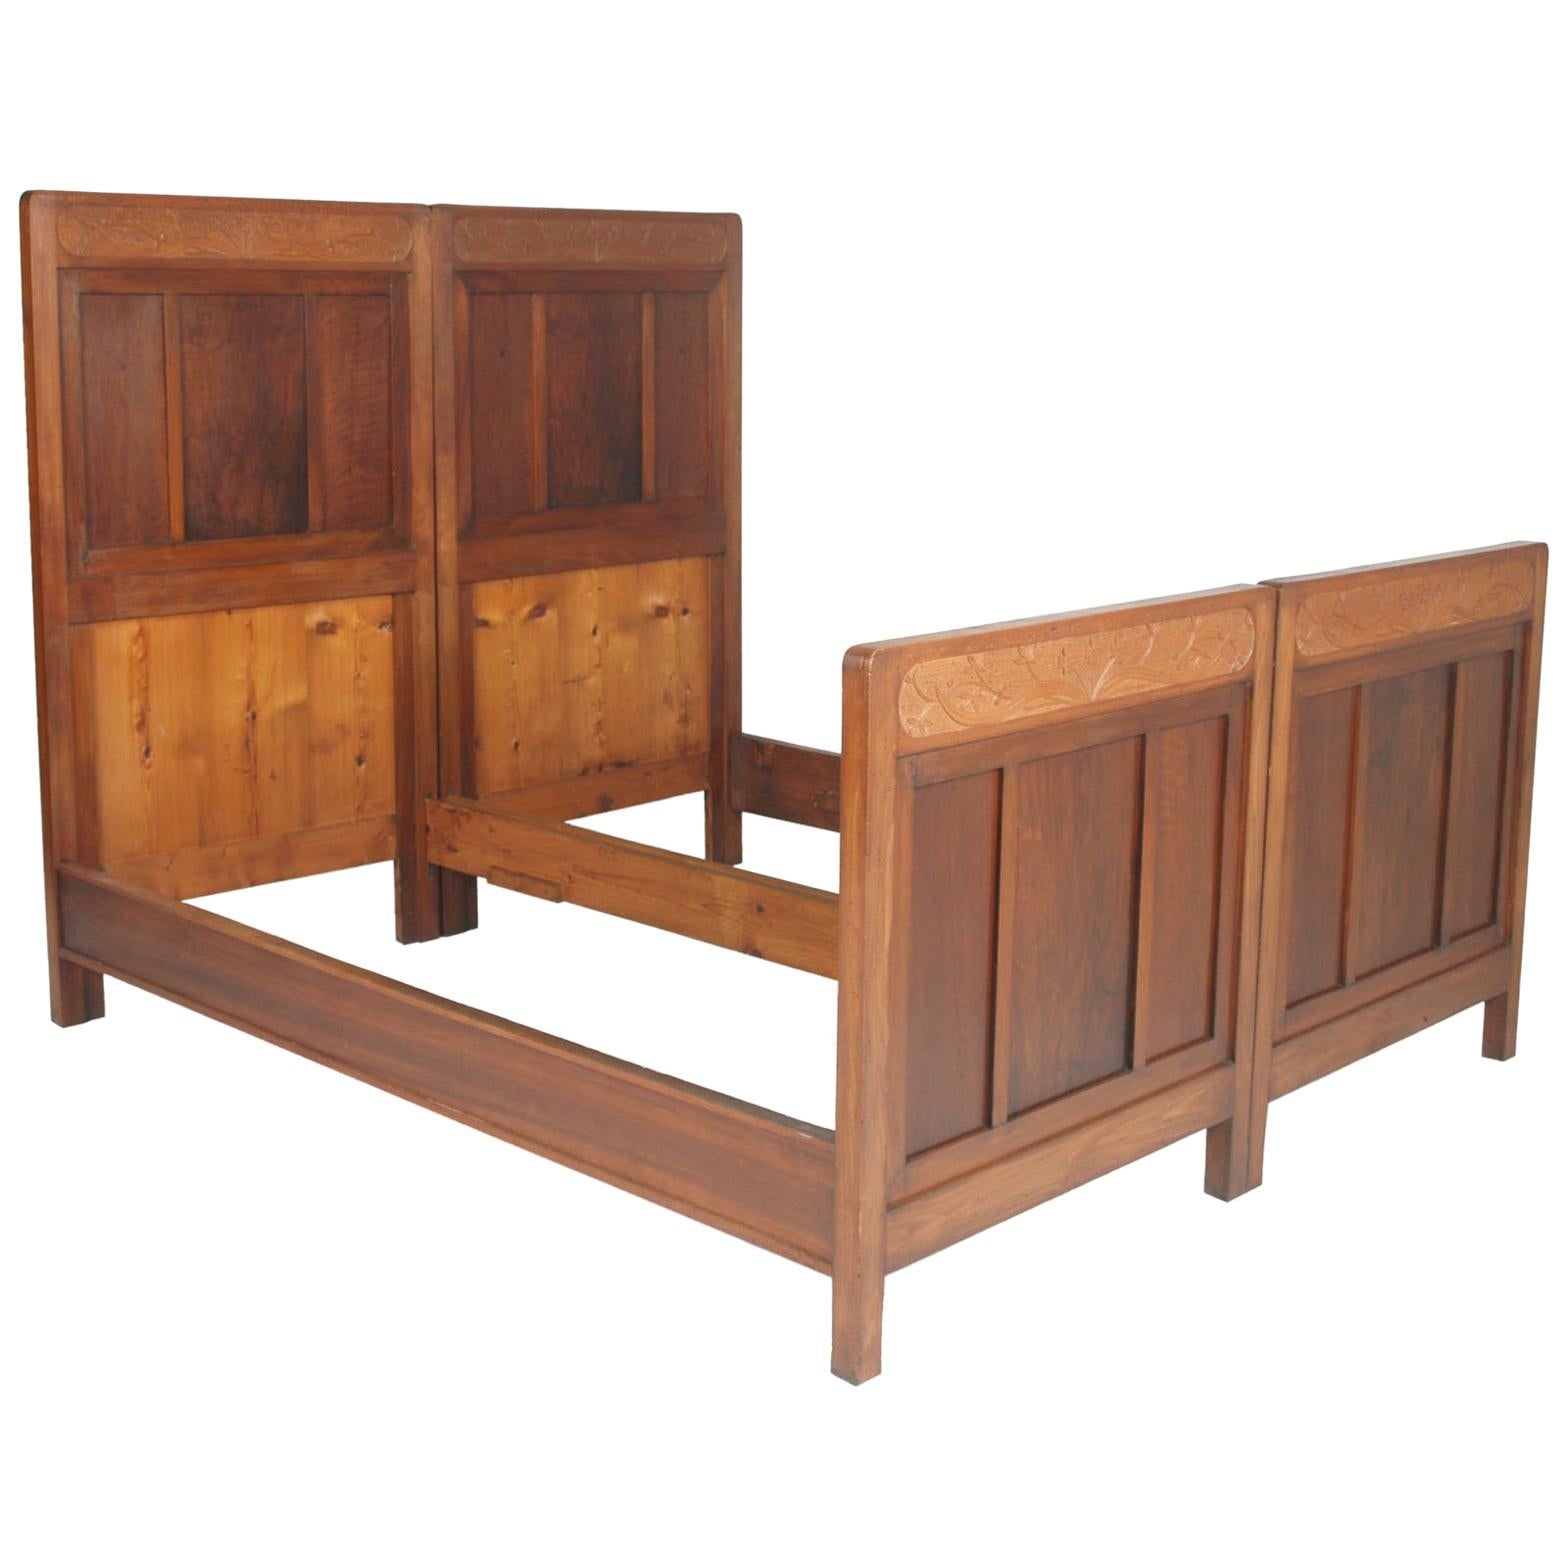 Antique Double Twin Bed, Art Nouveau, in Hand Carved Cherry Wood, Wax Polished